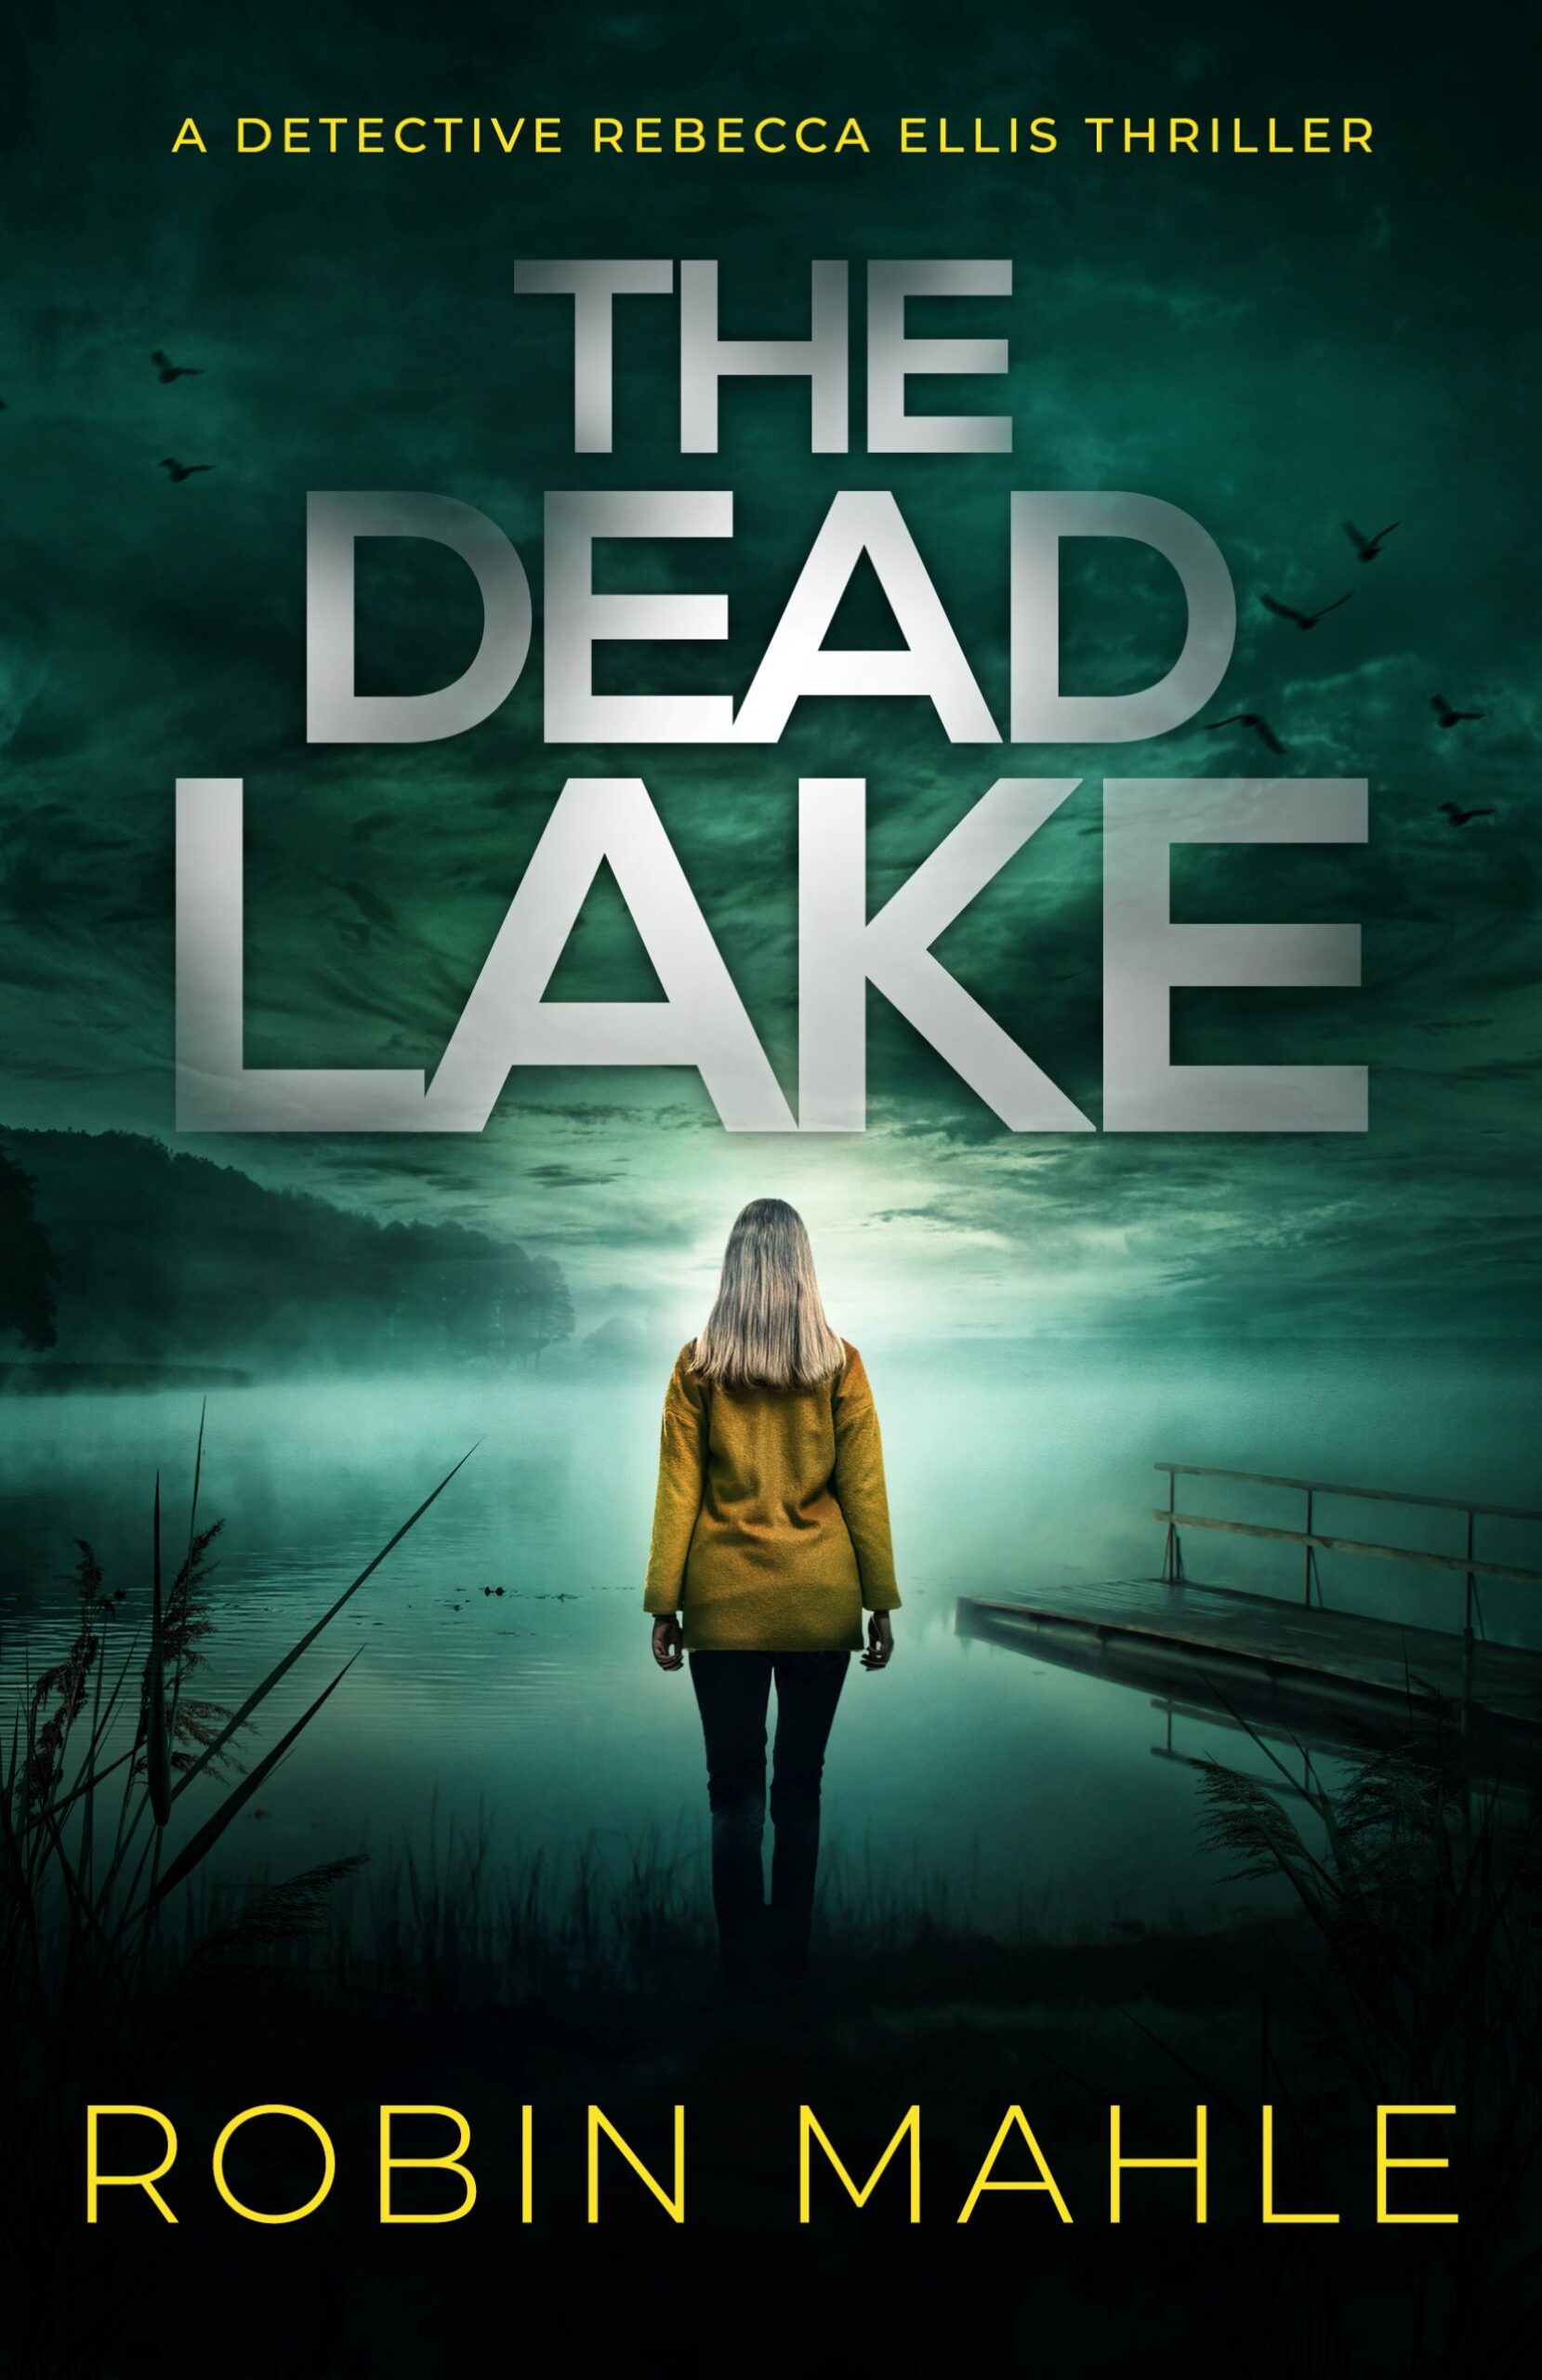 ROBIN MAHLE NEW RELEASE – THE DEAD LAKE